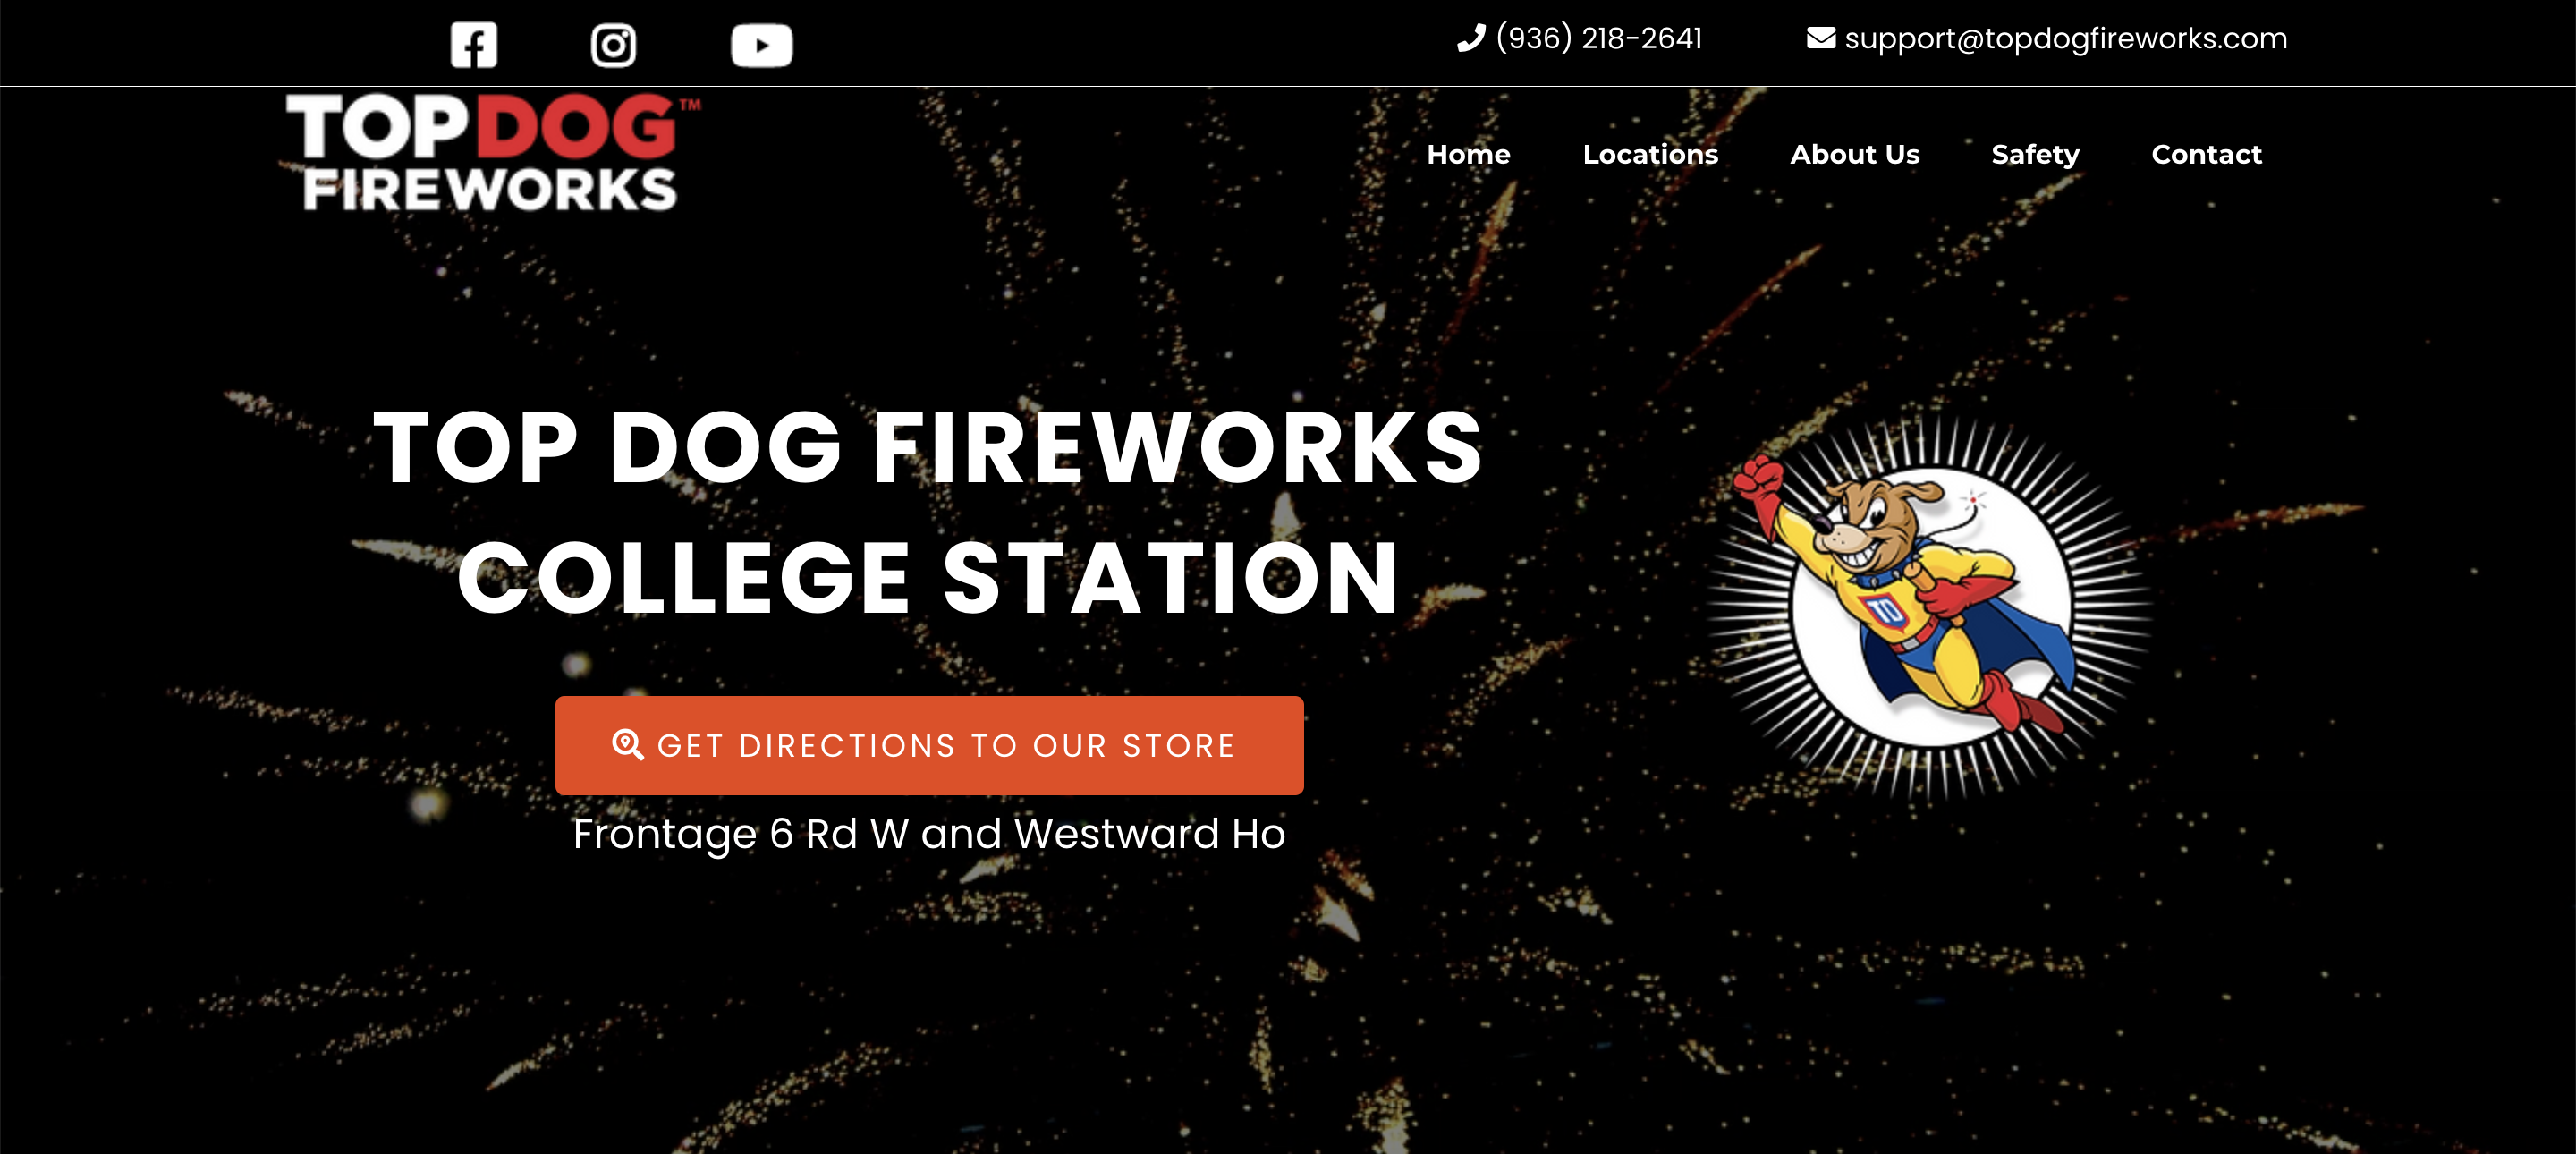 TOPDOG Fireworks The Top College Station Fireworks Store